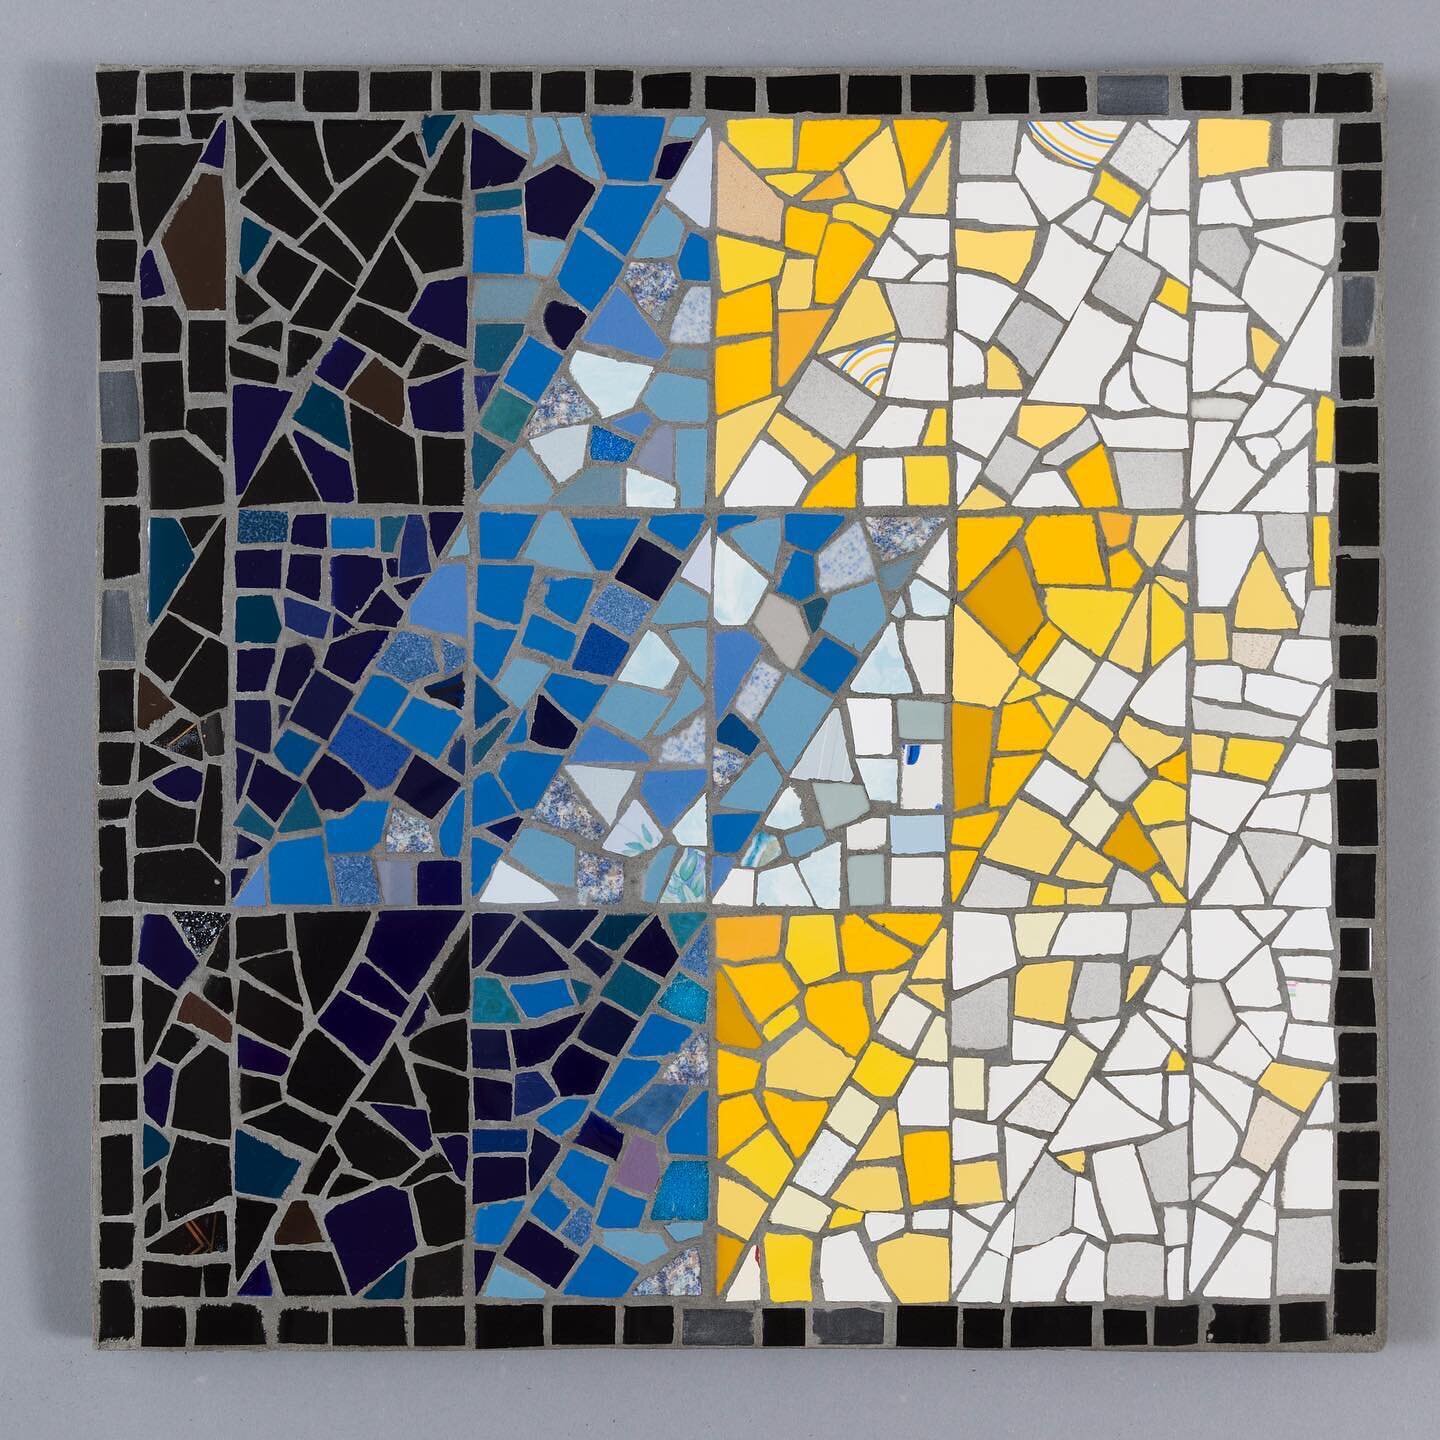 It&rsquo;s been a long time since I made a mosaic -  lovely to use the reverse method again! - a little trial before a workshop for the Newquay renaissance project next month #newquayrenaissanceproject @newquayrenaissanceproject #mosaics #contemporar